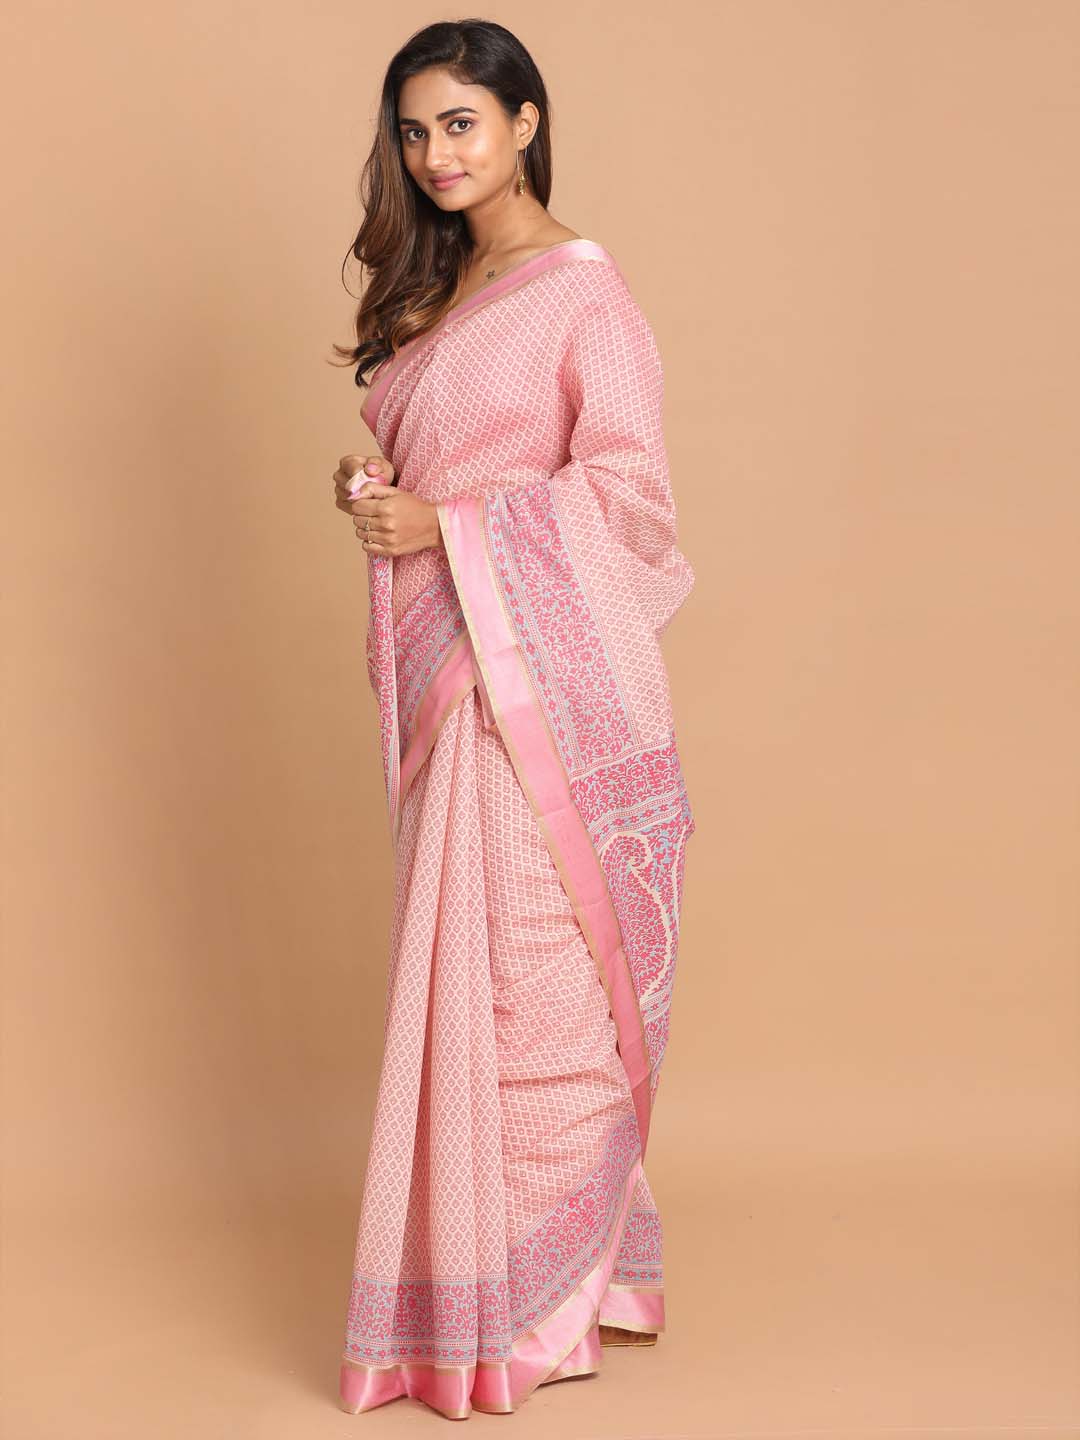 Indethnic Printed Cotton Blend Saree in Pink - View 2